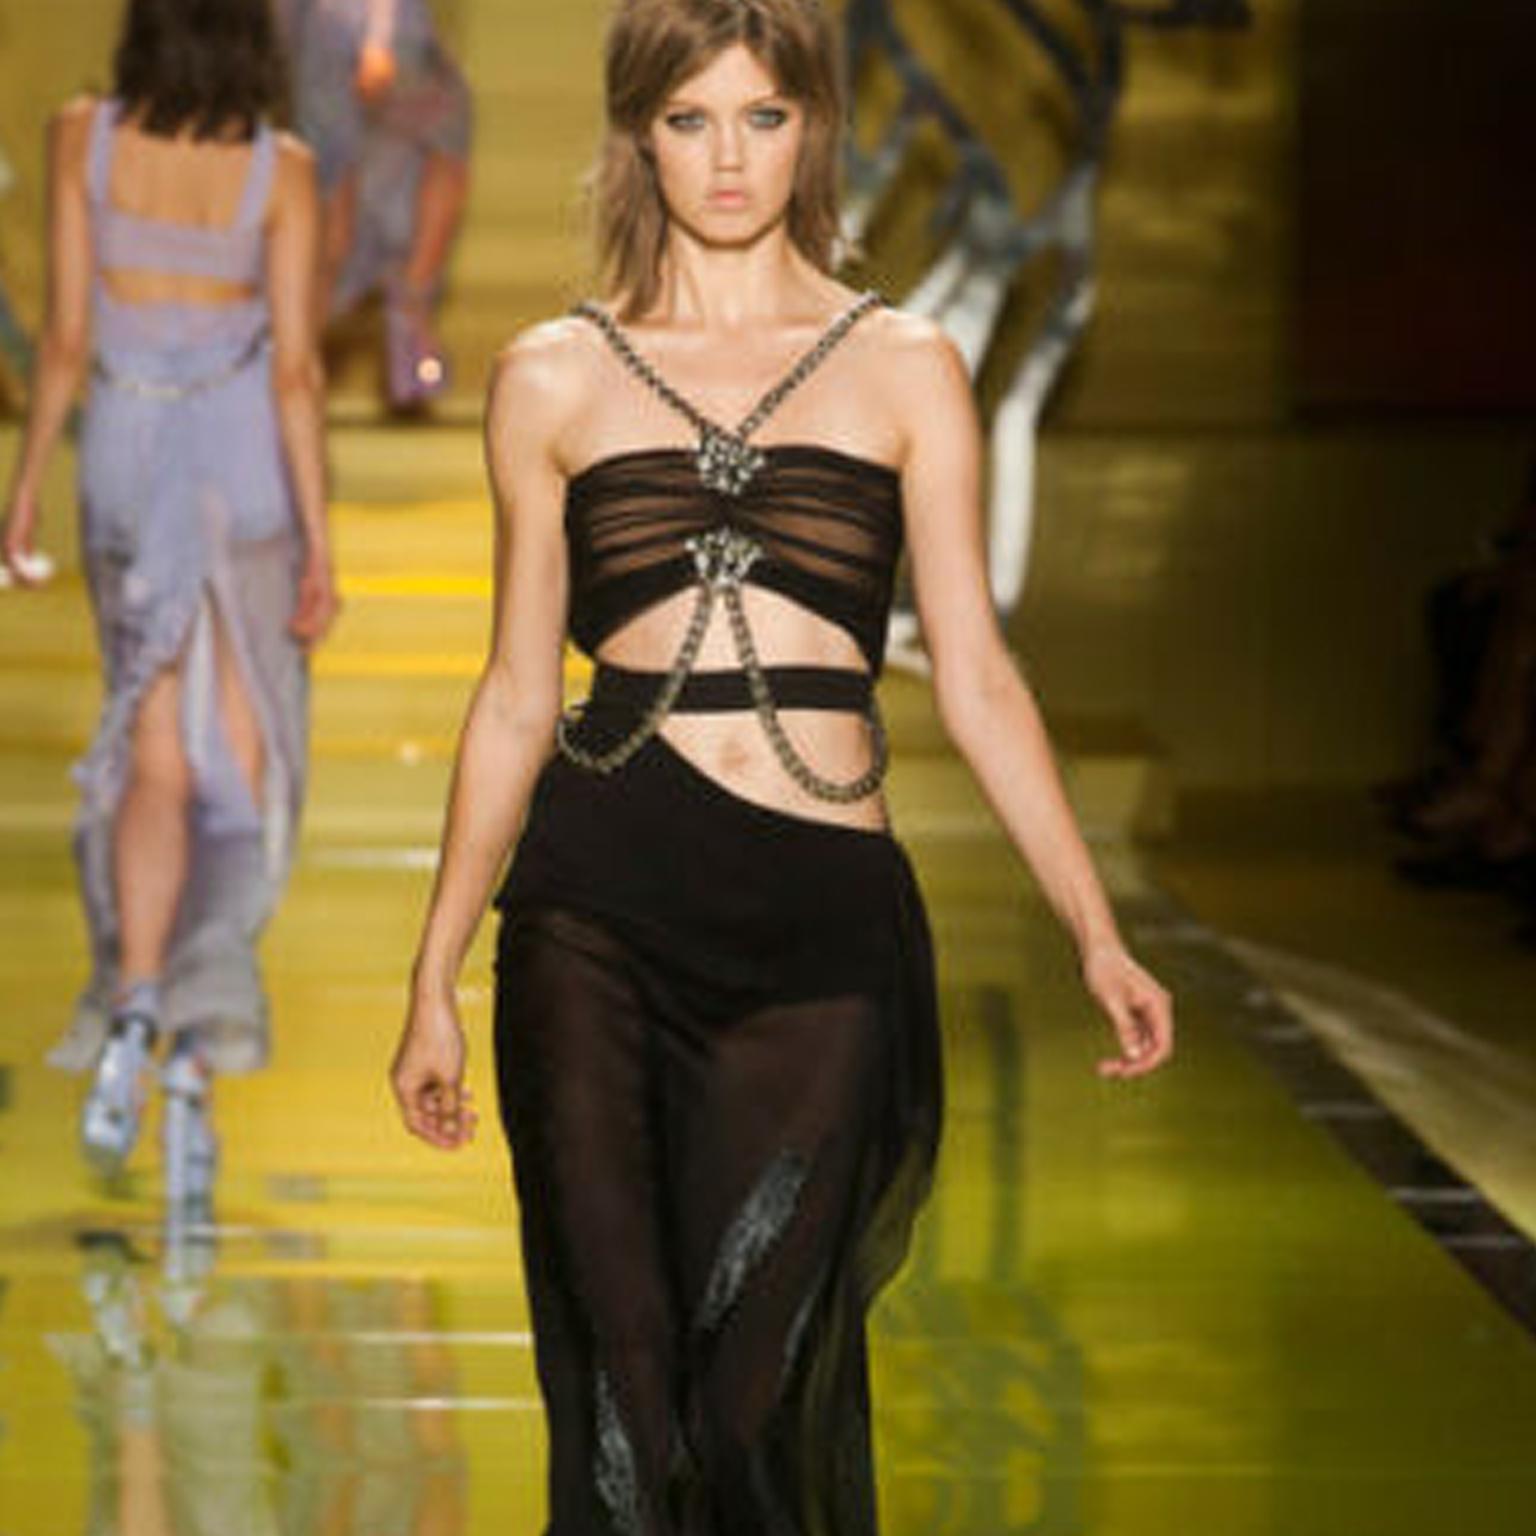 VERSACE
FROM THE SPRING SUMMER 2014 RUNWAY FINAL LOOK
Silk, polyester, polyamide, elastane. Black ruched bustier with nude lining. Silver-tone Medusa pin at bustier top. Attached chunky metal chain harness. Cut out at waist. Attached elastane boy